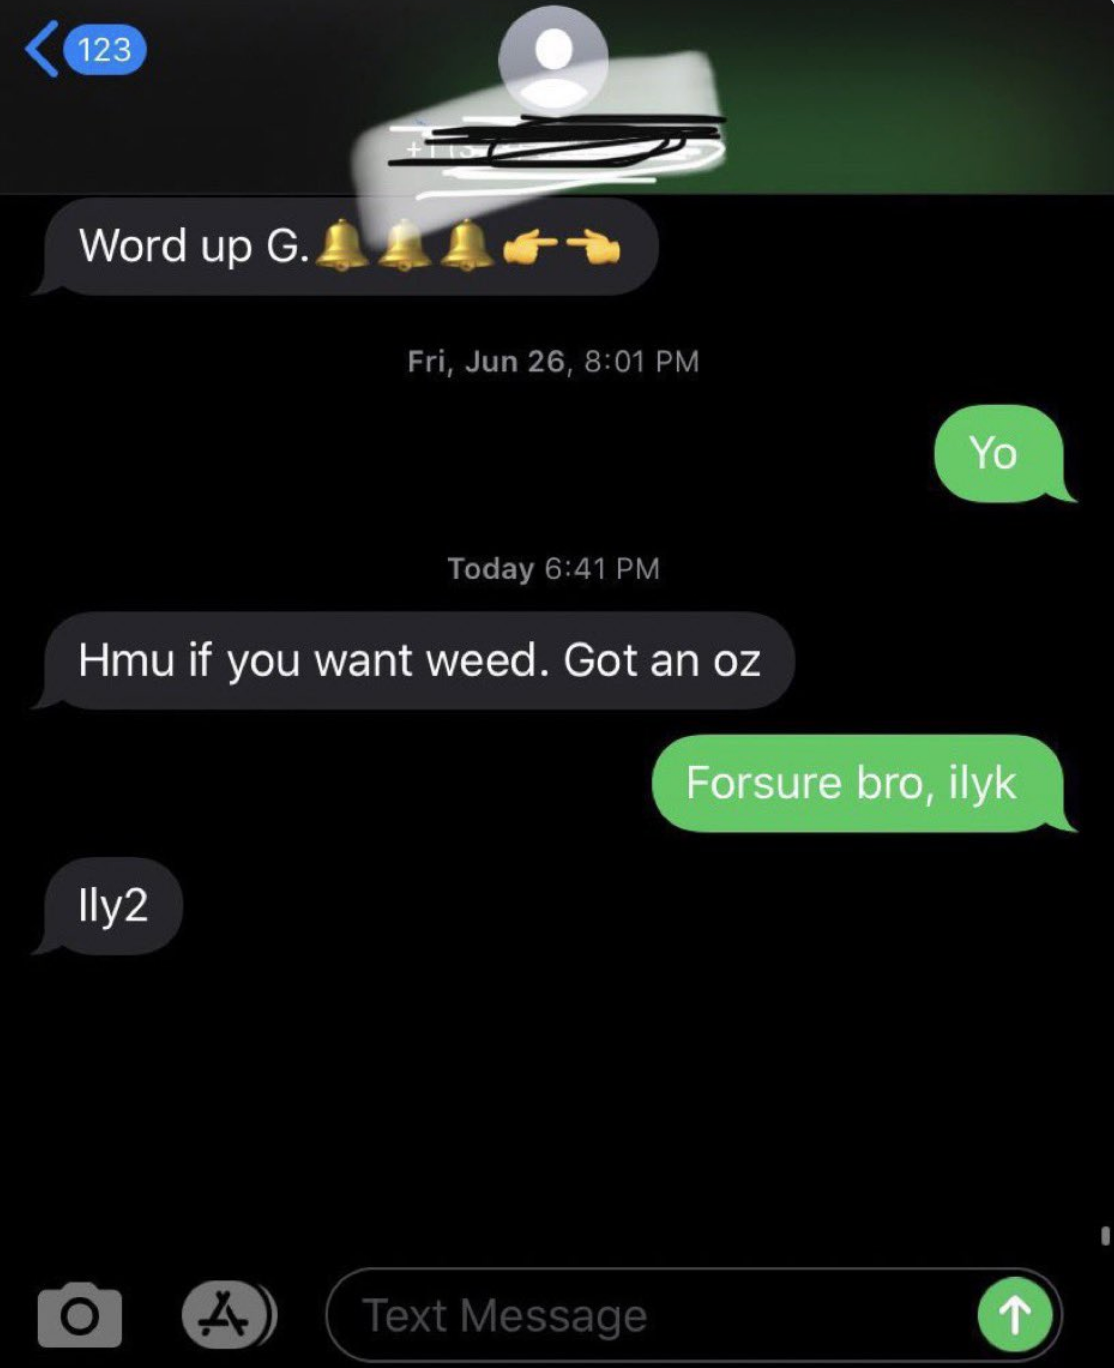 Text conversation about obtaining weed, with one person offering a specific amount and the other confirming interest